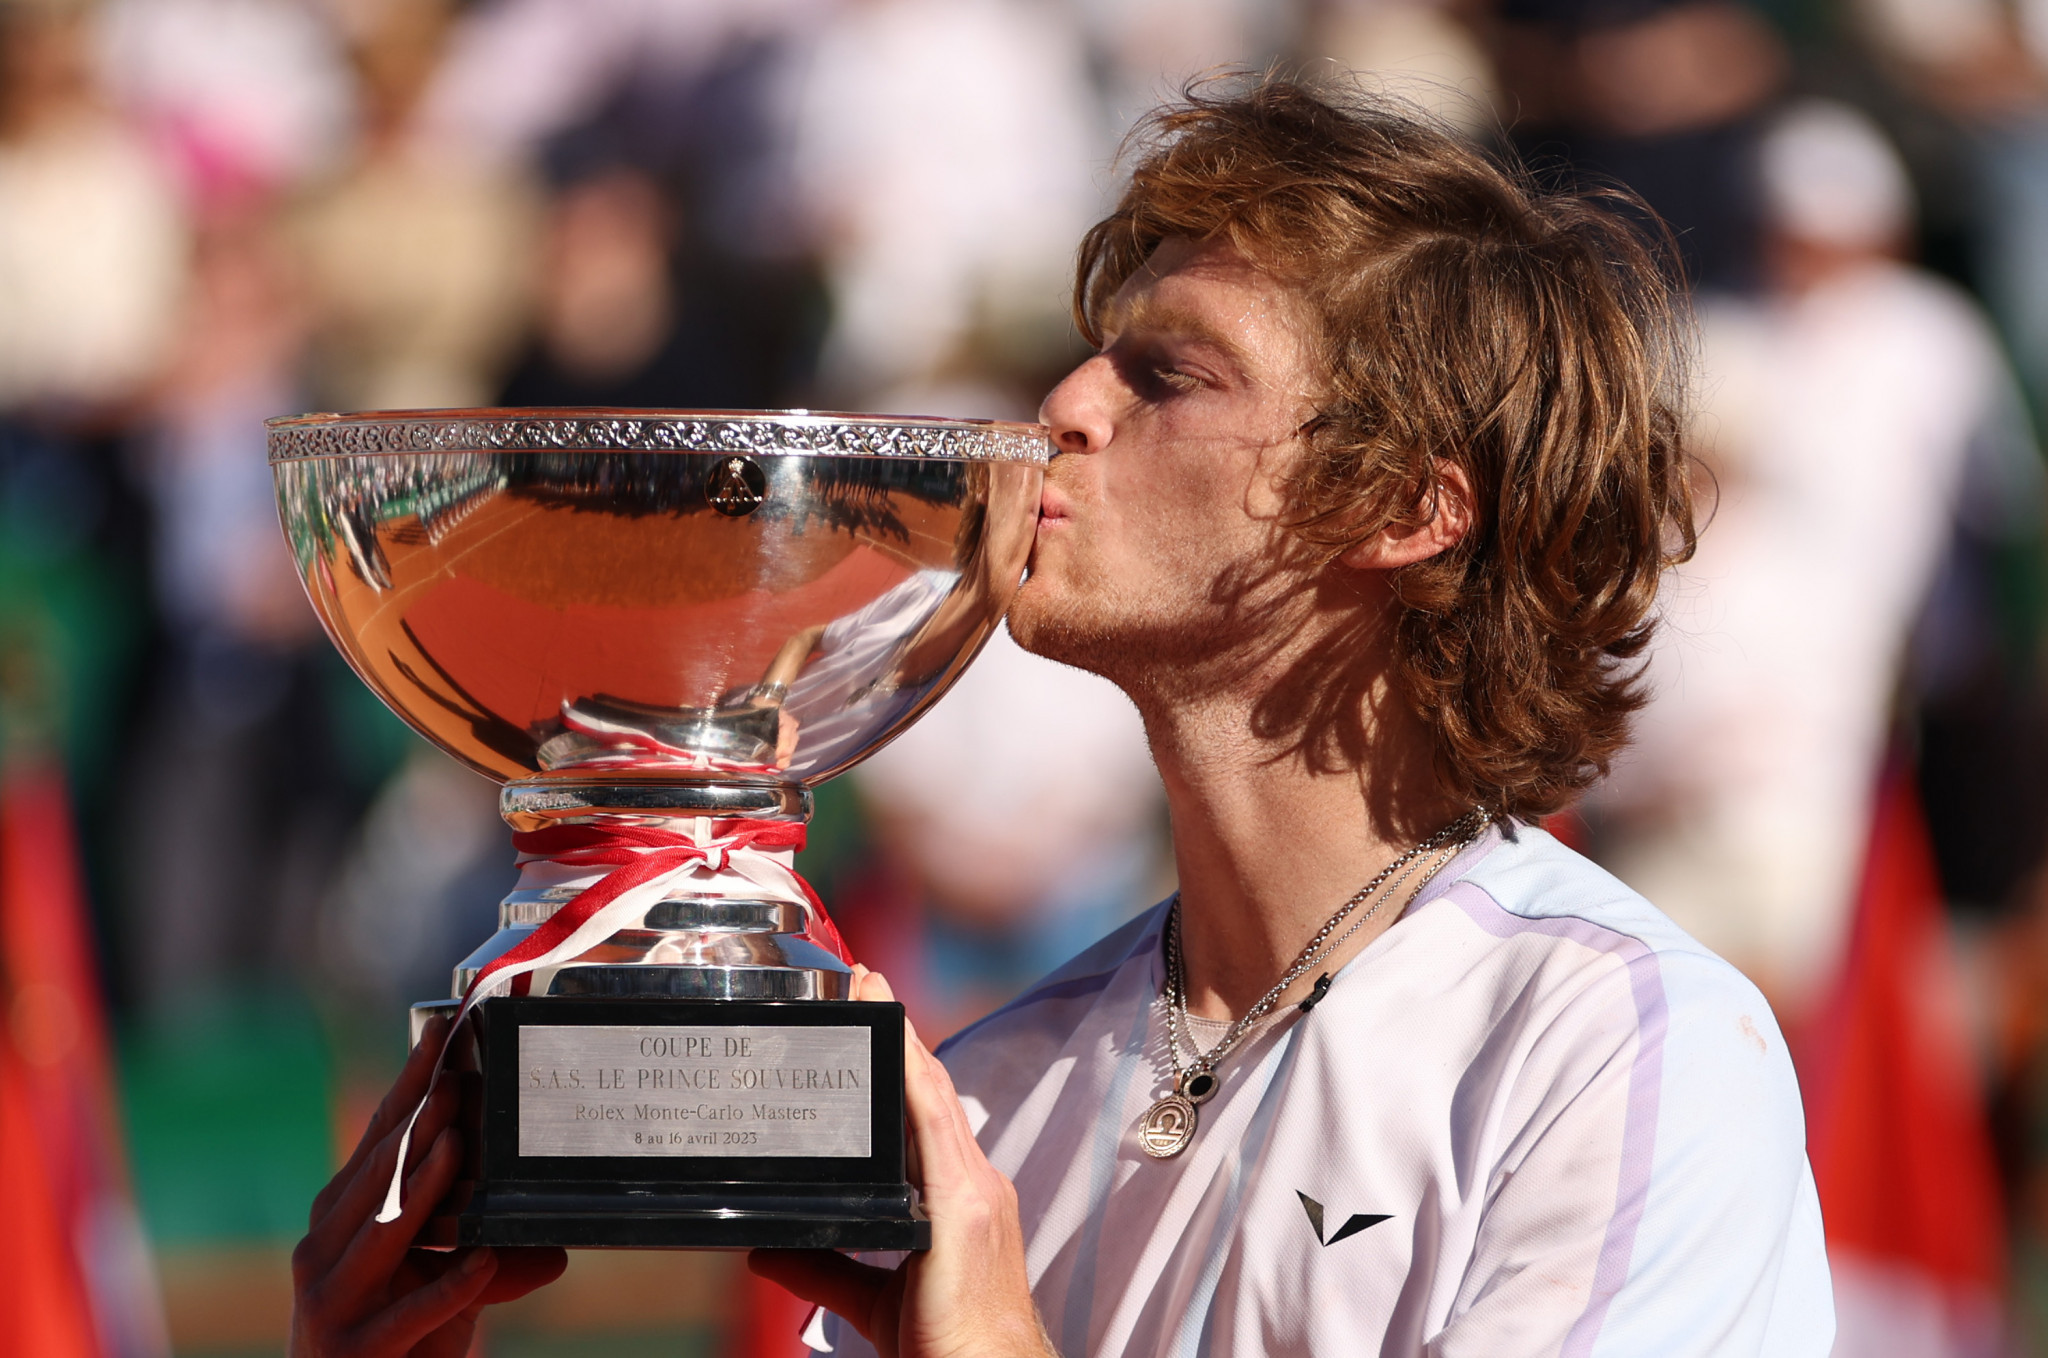 Andrey Rublev won his first ATP Masters 1000 title in Monte-Carlo ©Getty Images